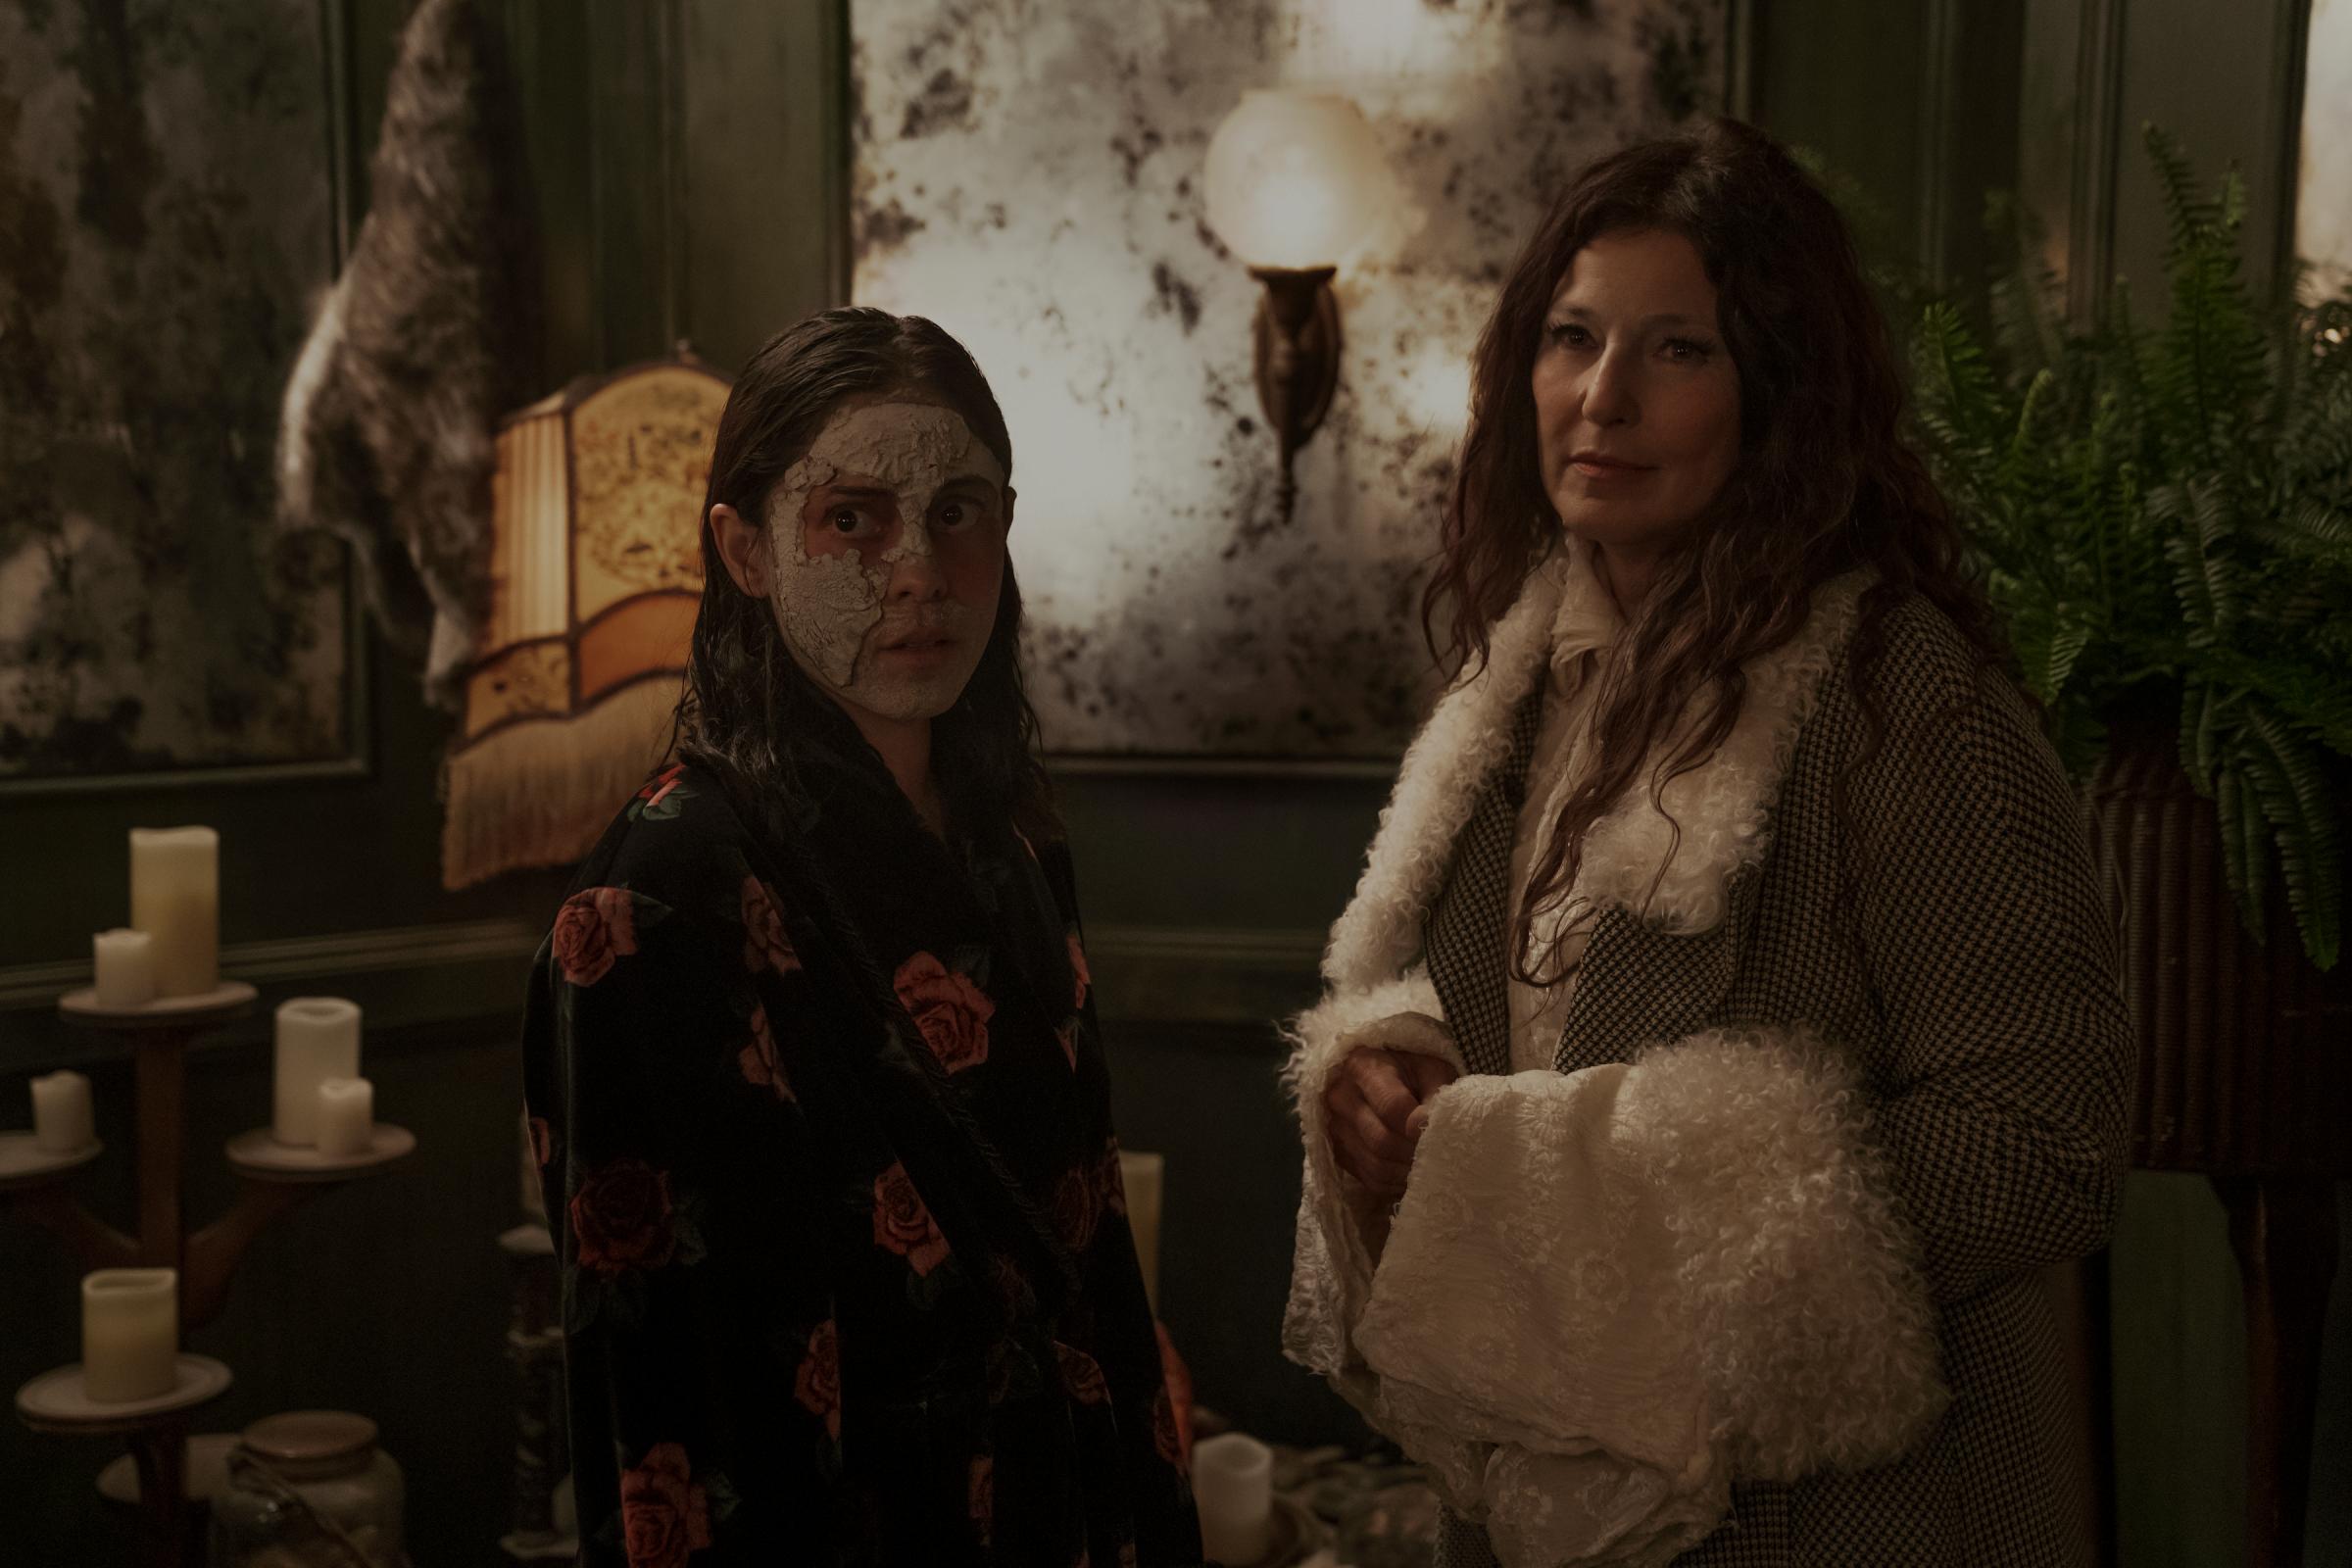 BRAND NEW CHERRY FLAVOR (L to R) ROSA SALAZAR as LISA NOVA and CATHERINE KEENER as BORO in episode 106 of BRAND NEW CHERRY FLAVOR Cr. MERIE WEISMILLER WALLACE/NETFLIX © 2021